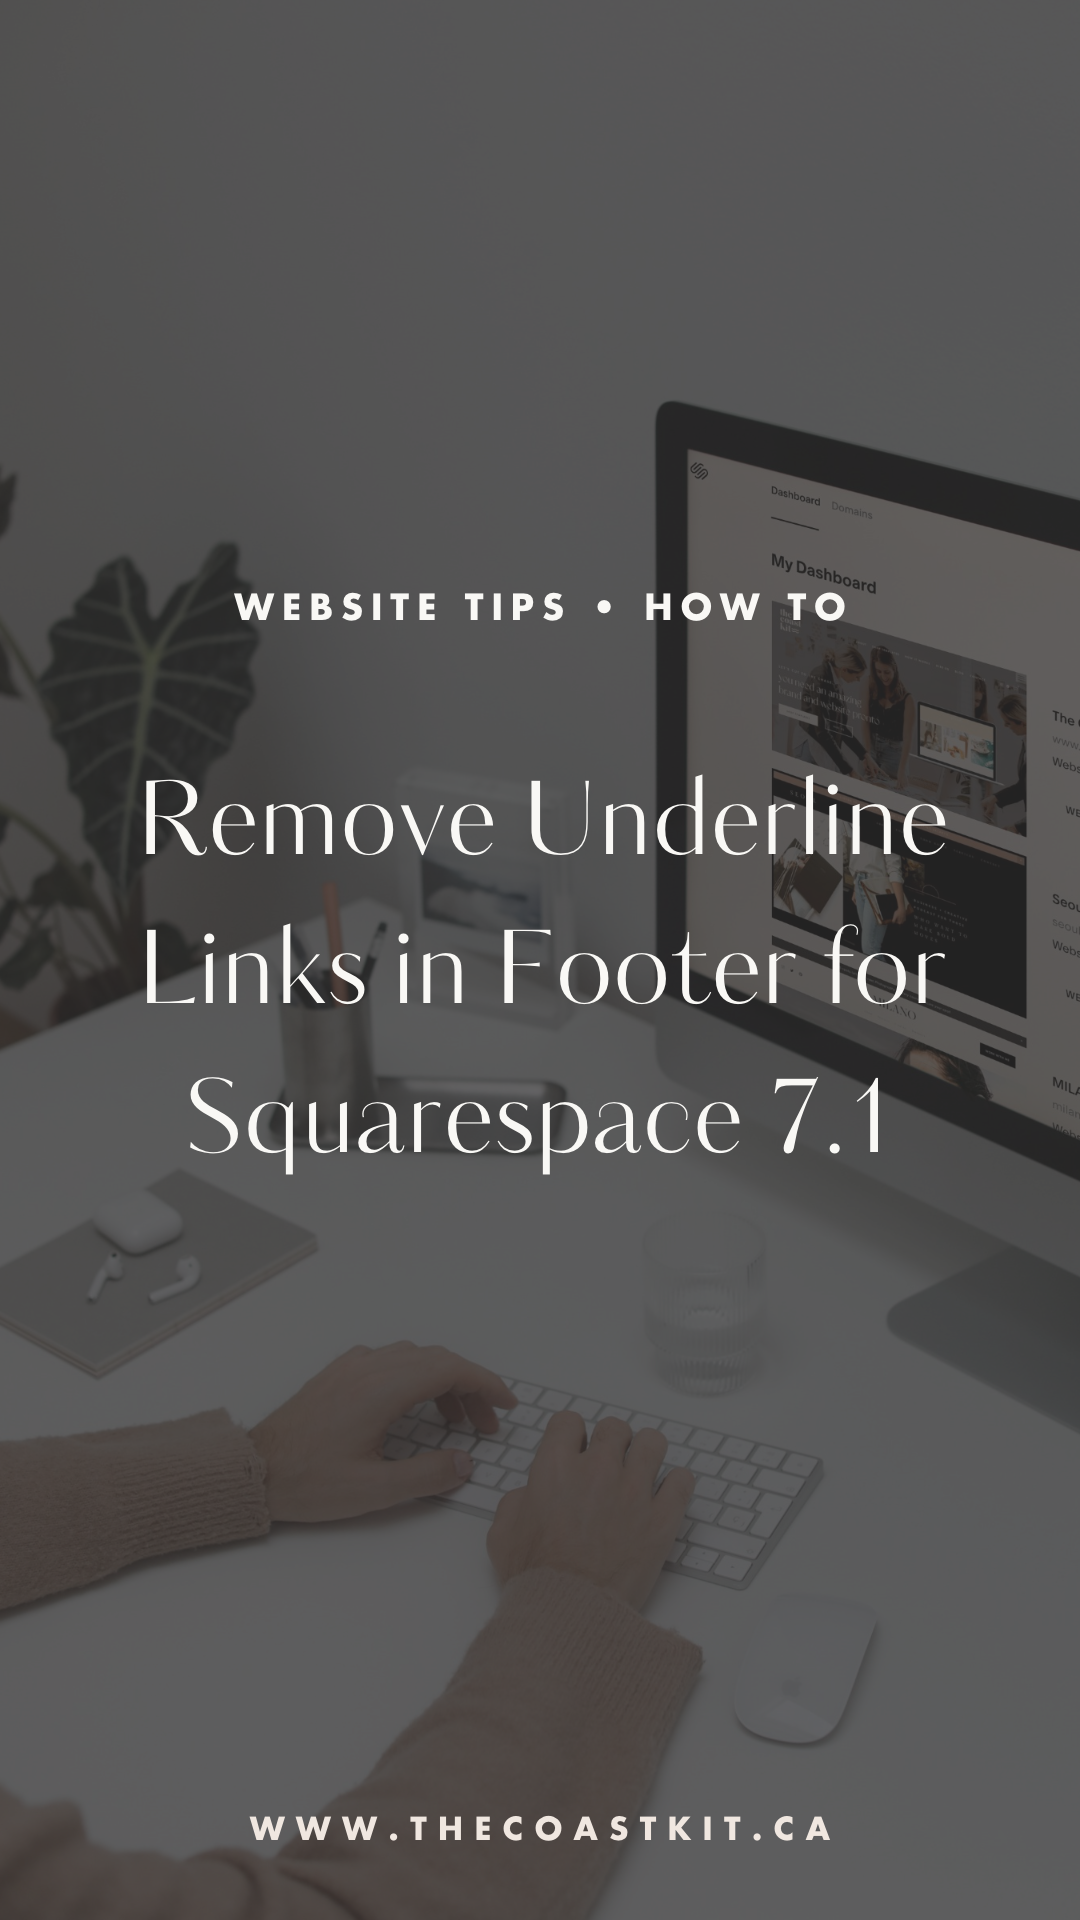 how-to-remove-underline-links-footer-squarespace-7-1-2.png